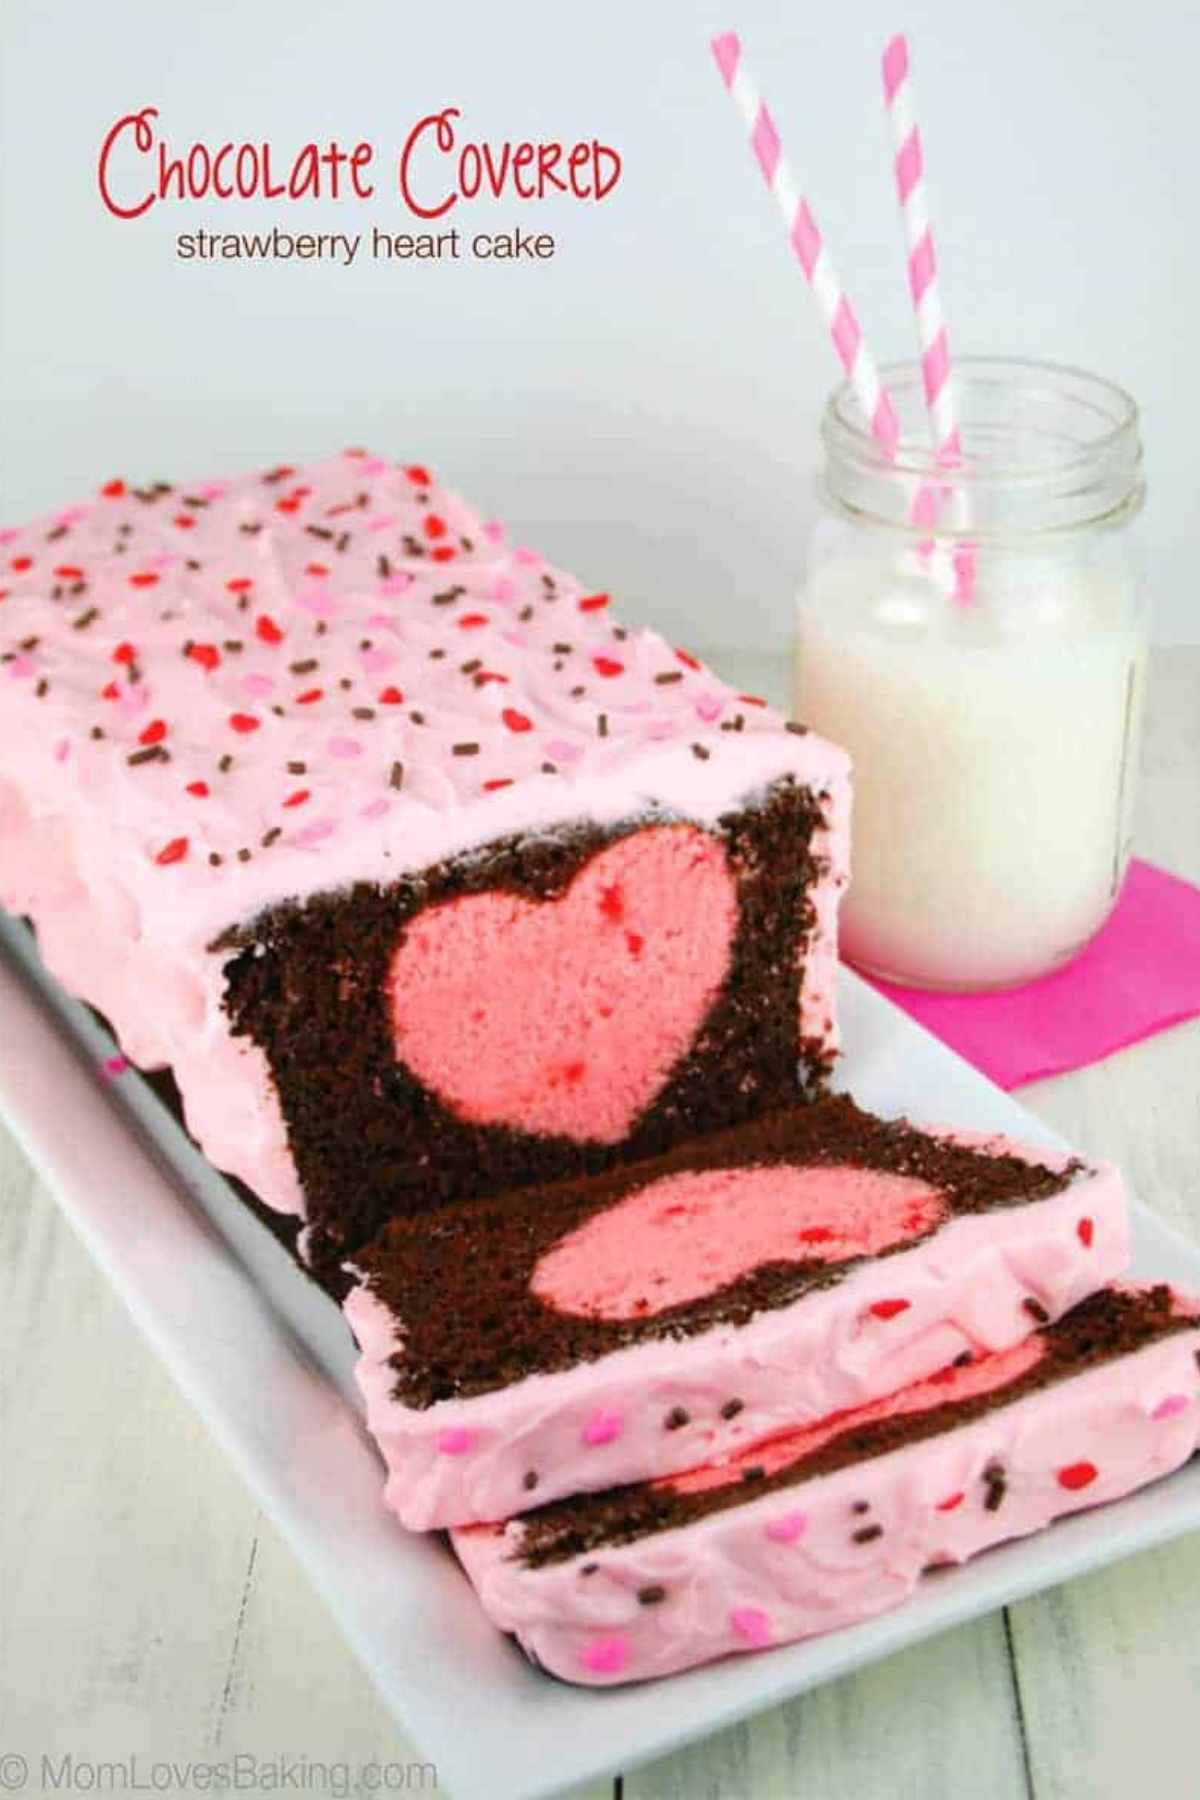 Loaf cake with pink frosting and a pink heart shape surrounded by chocolate cake.